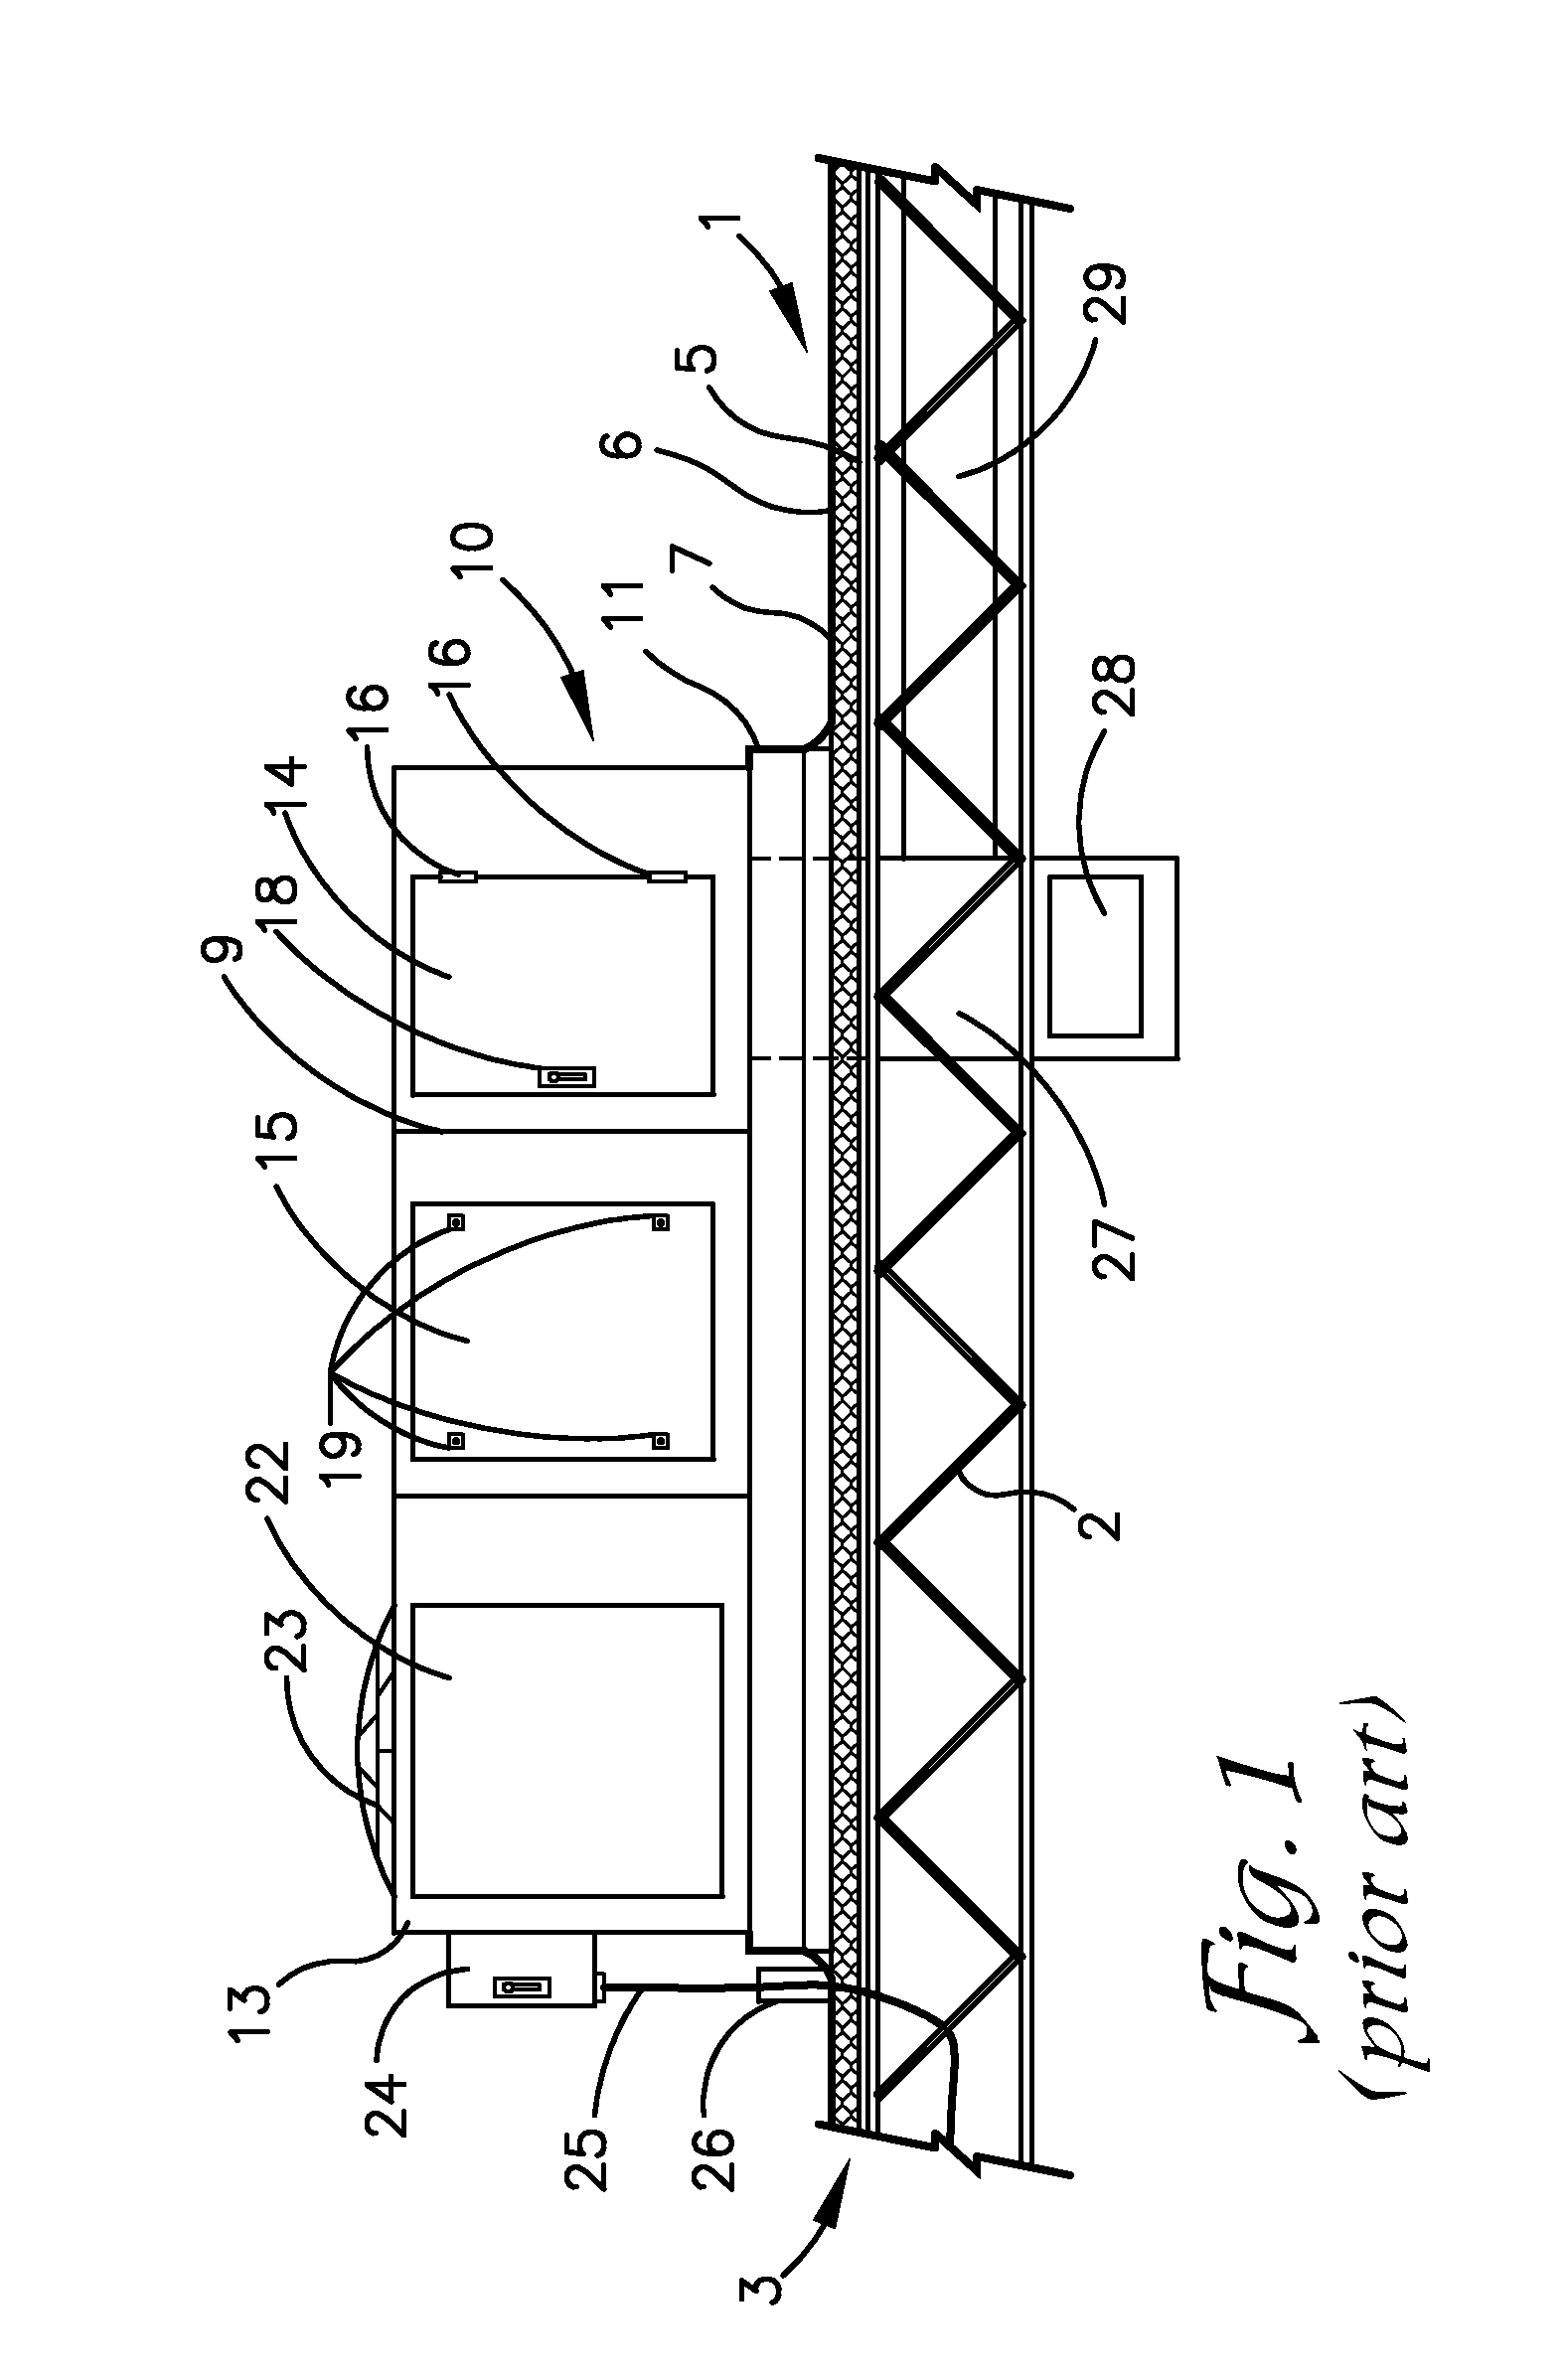 Equipment enclosure and method of installation to facilitate servicing of the equipment